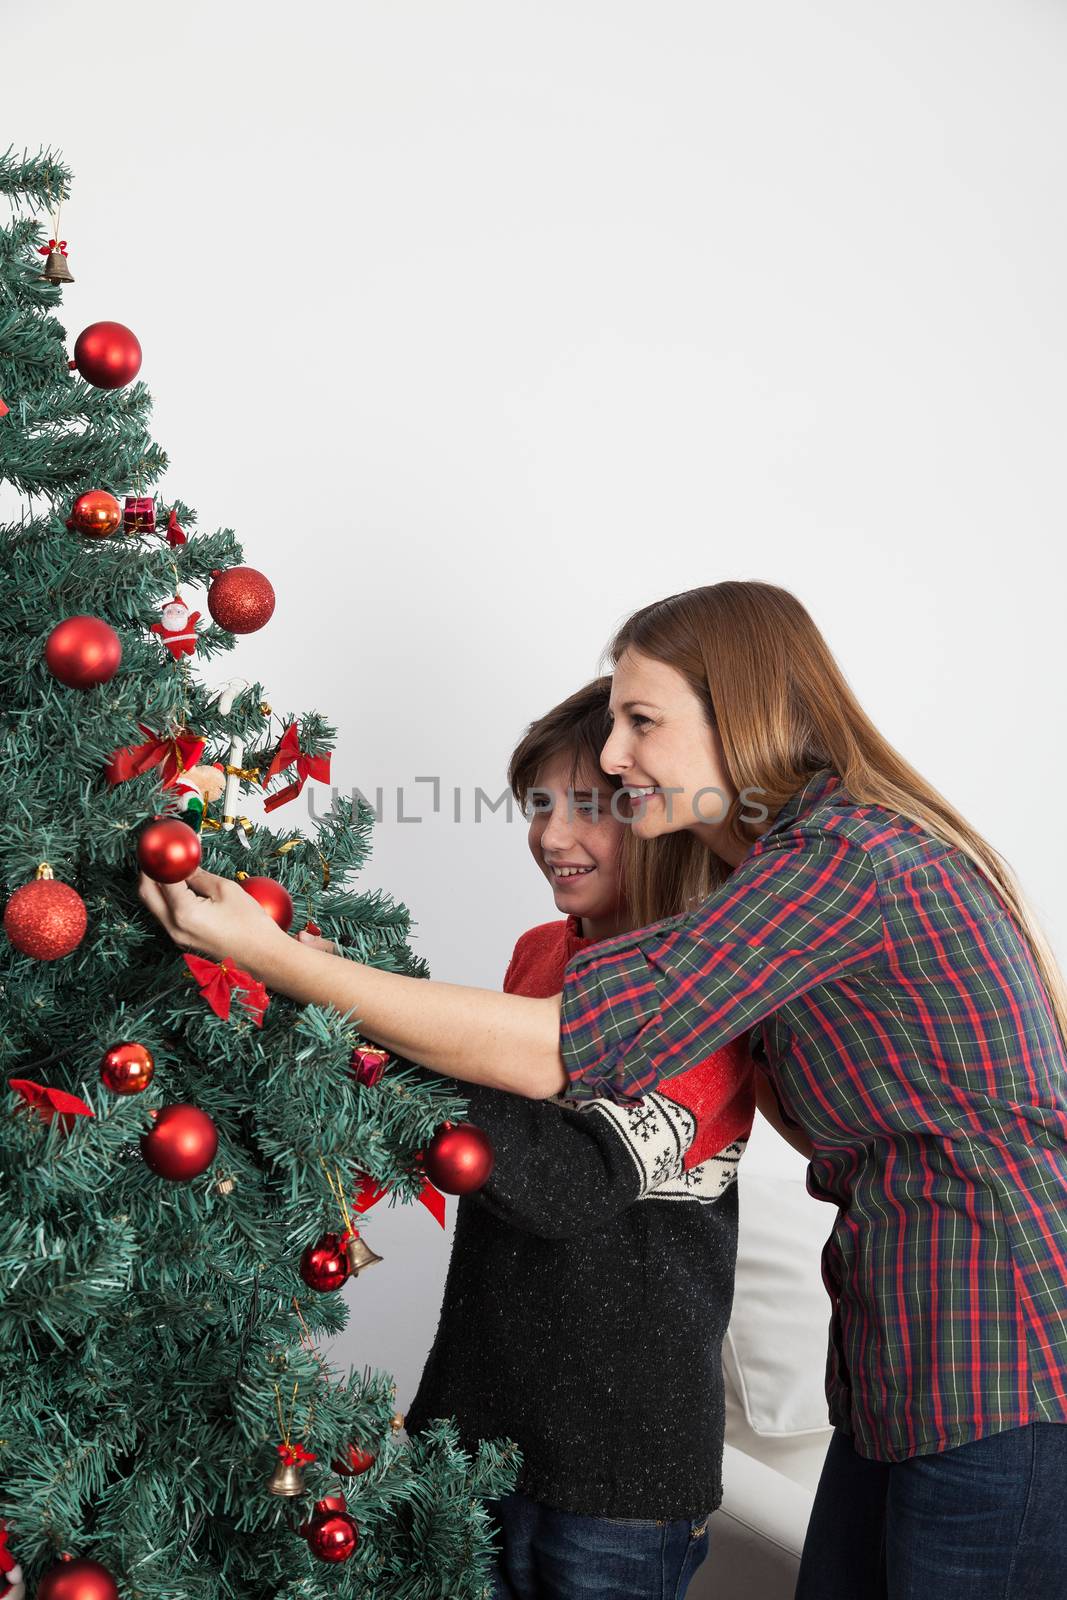 10-12, 30-35, adult, background, balls, boy, caucasian, celebration, christmas, claus, decorating, decoration, decorations, family, female, festive, fun, garland, green, hand, happy, holiday, home, kid, love, model, mom, mother, old, ornament, ornaments, person, present, property, red, releases, santa, seasonal, son, teen, teenager, tradition, tree, vertical, woman, x-mas, years, young